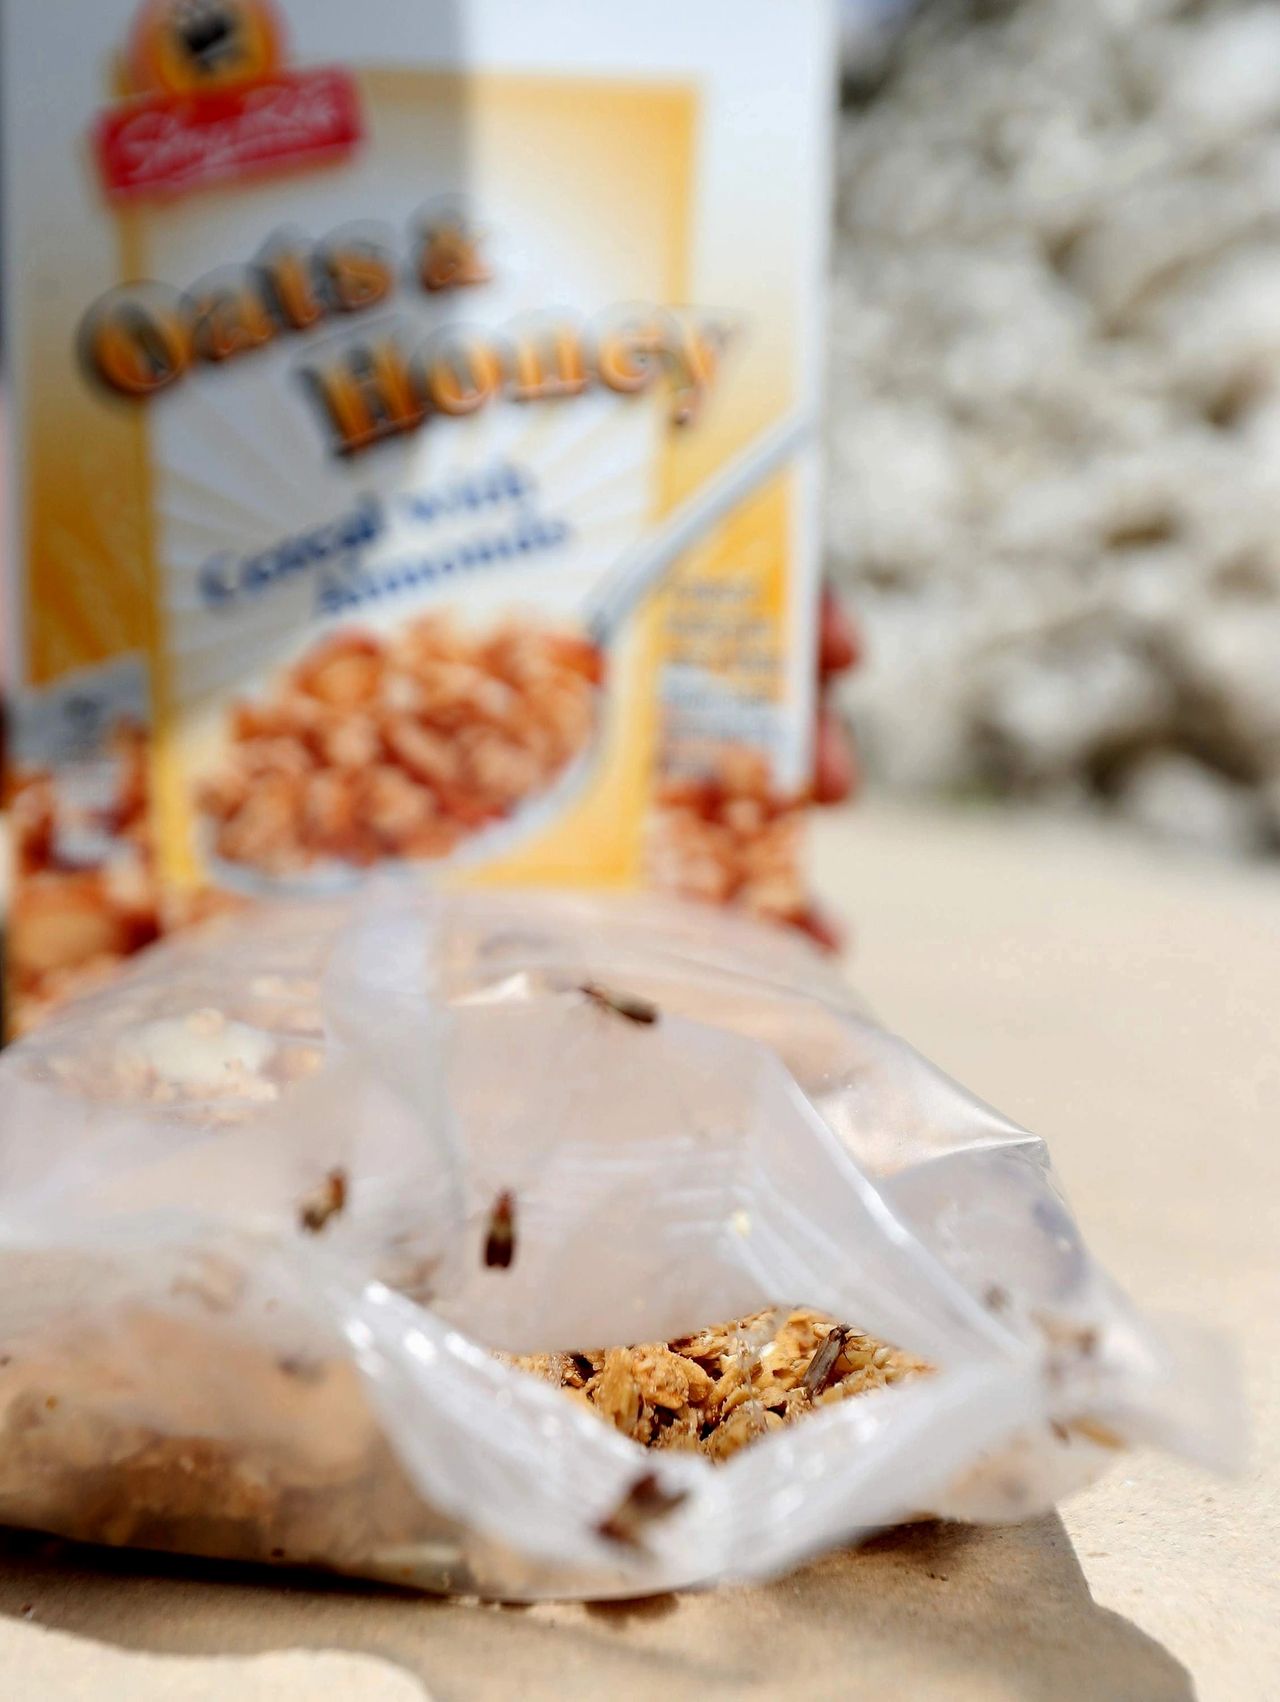 Cereal with pantry bugs